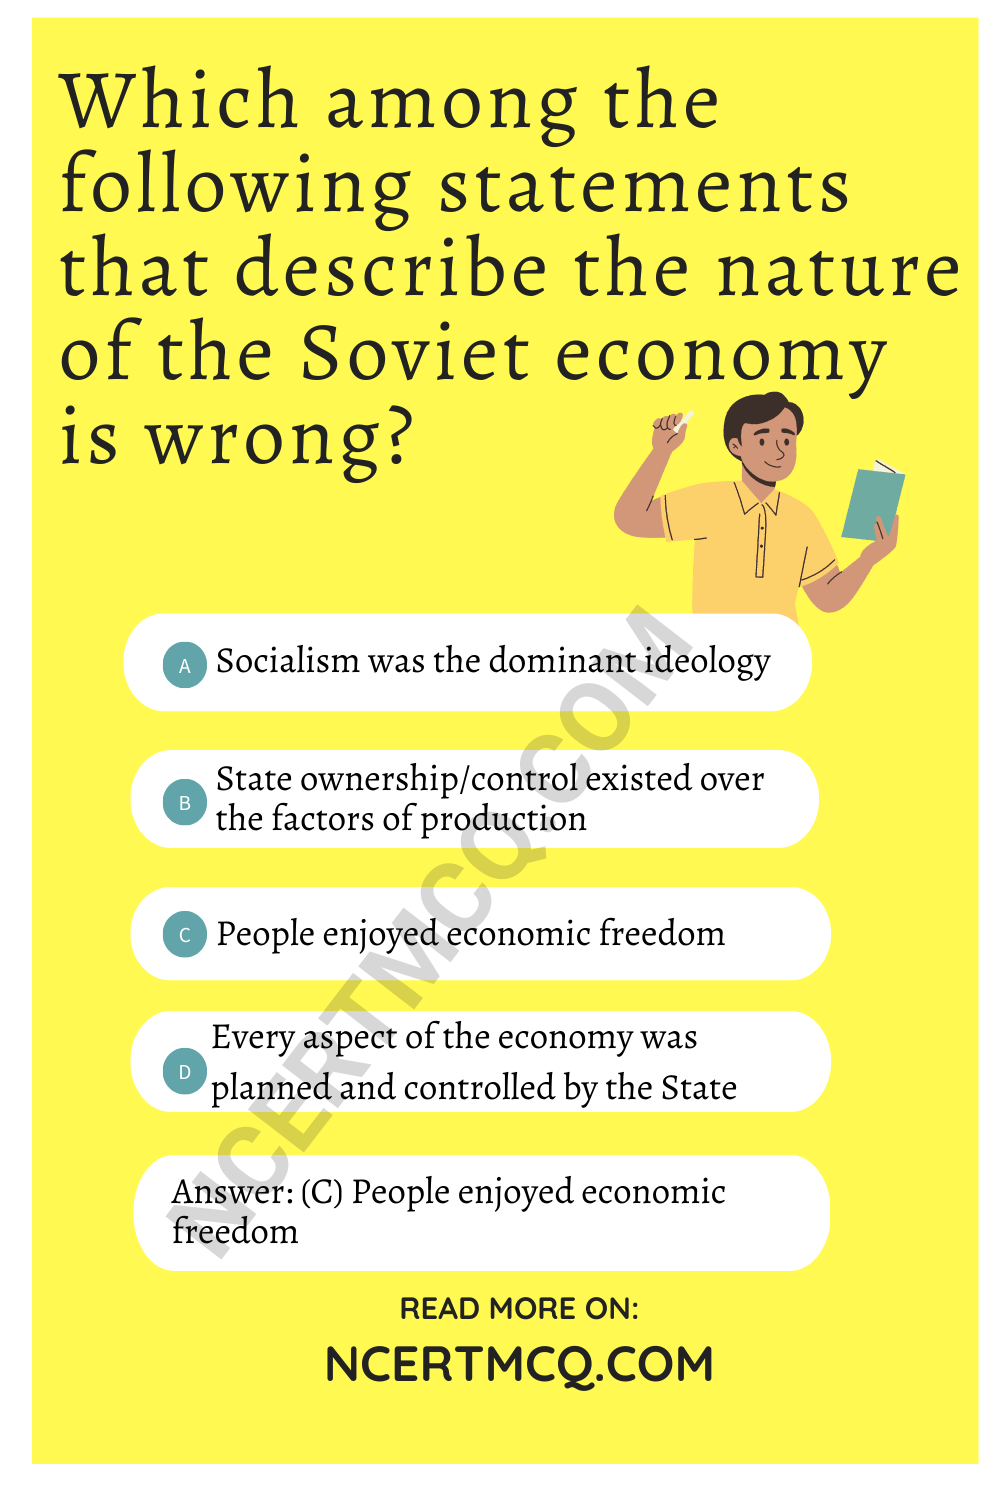 Which among the following statements that describe the nature of the Soviet economy is wrong?